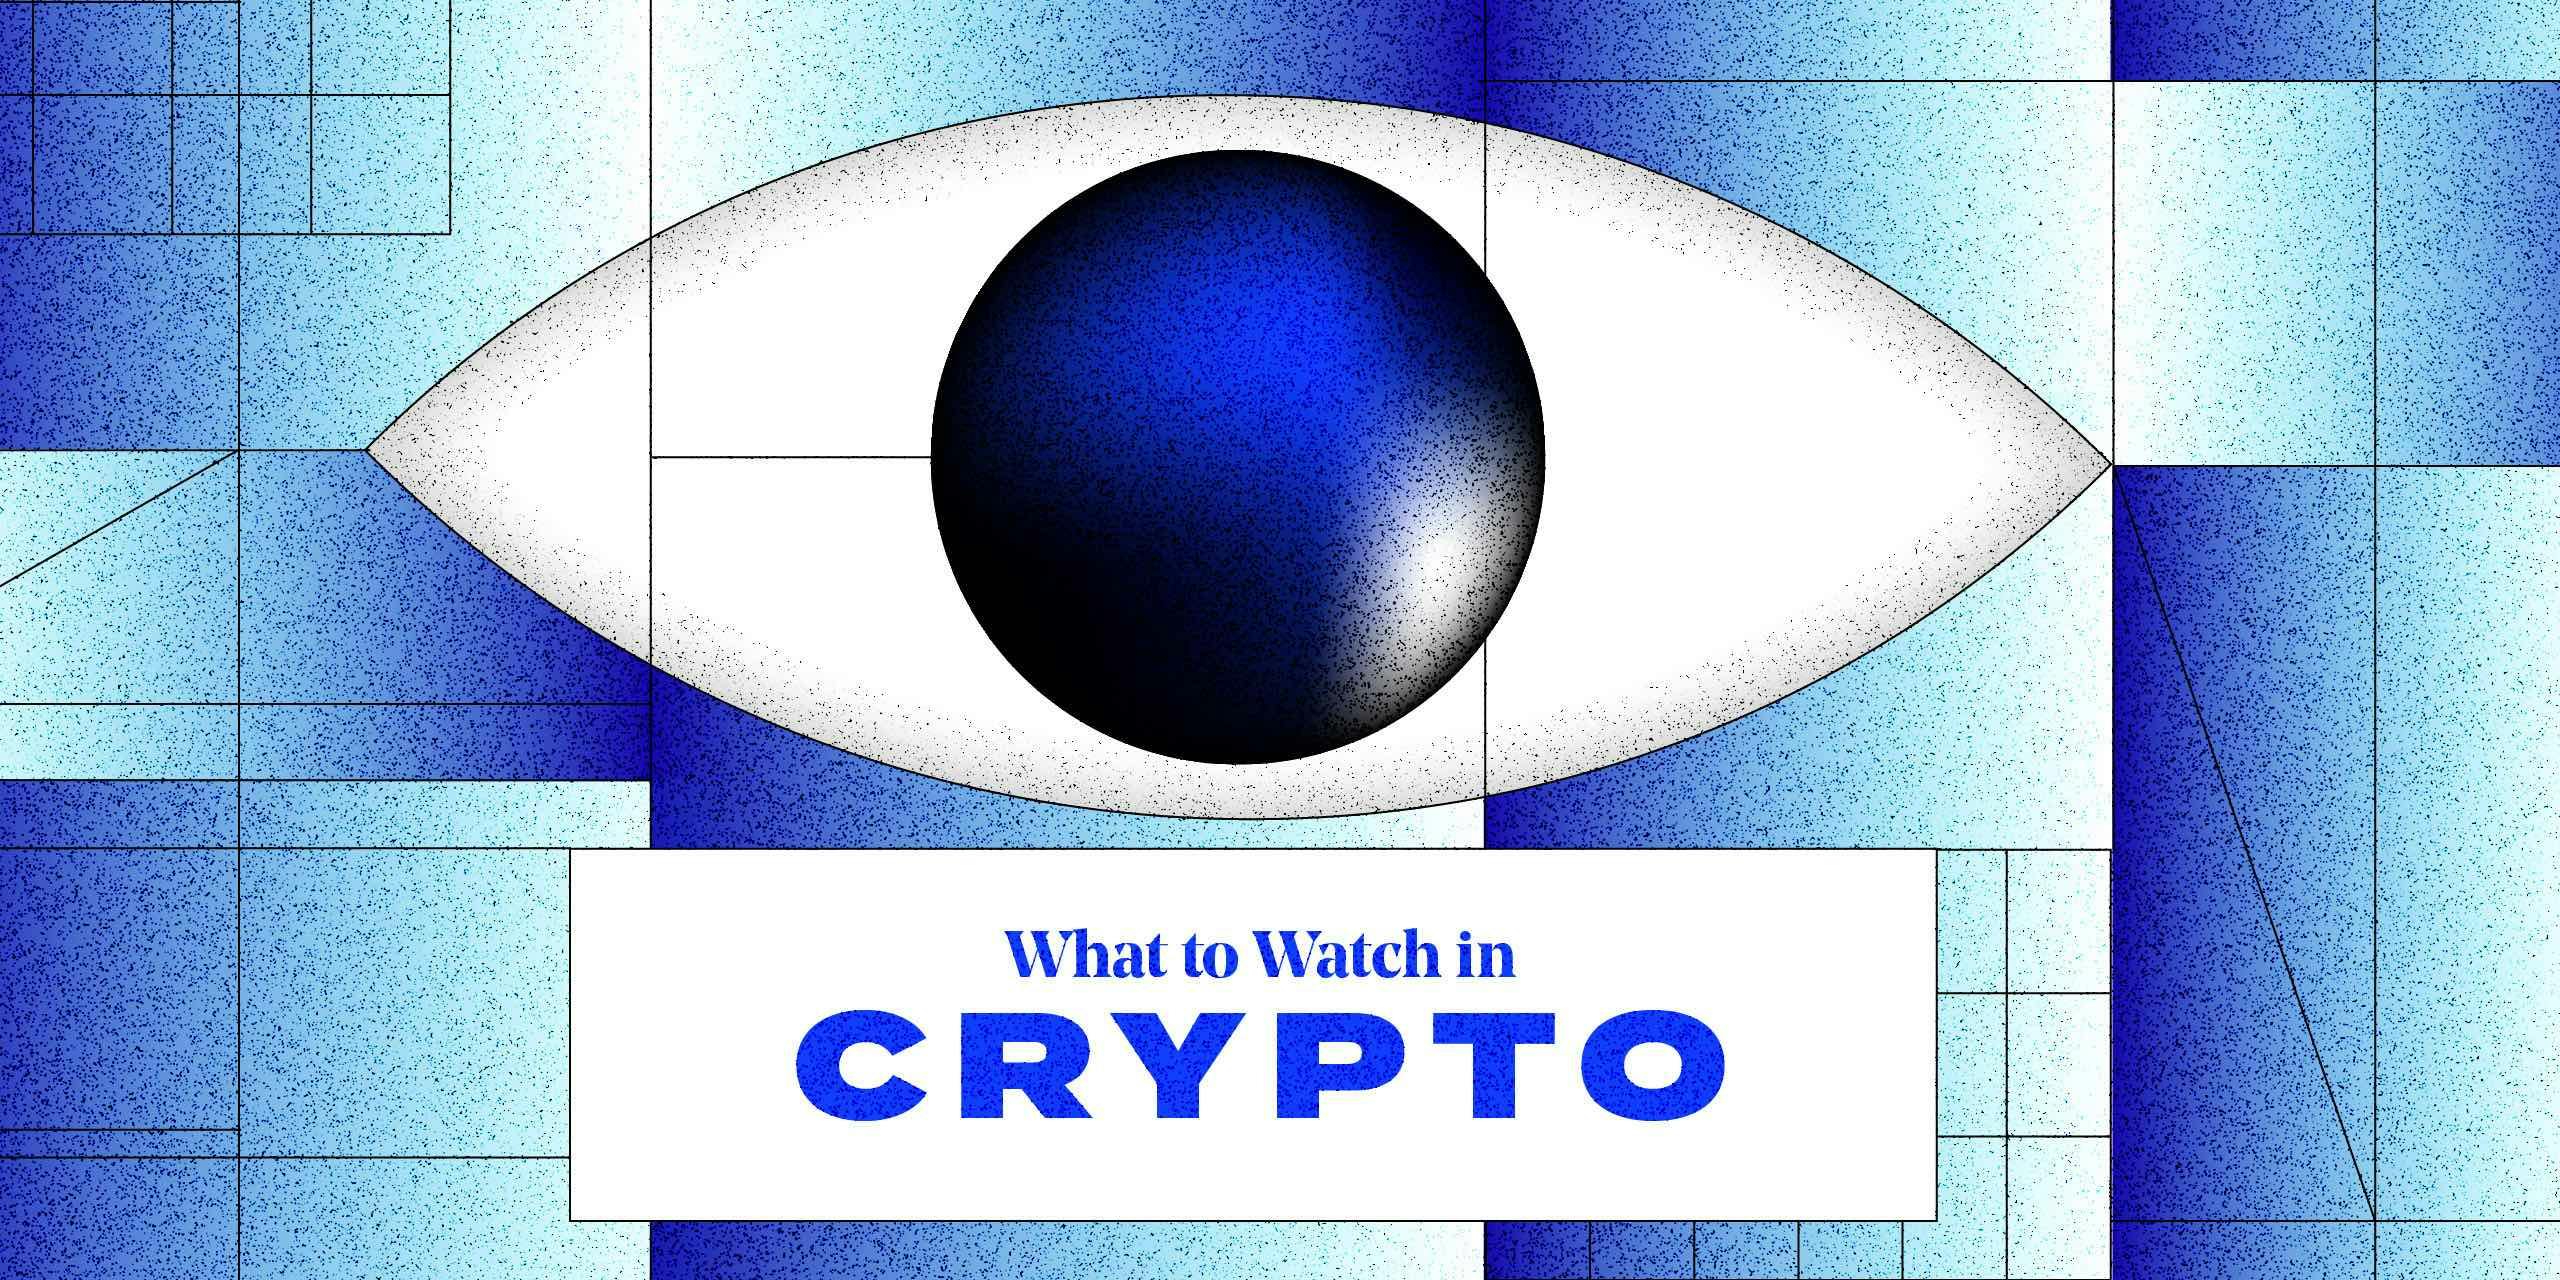 What to watch in crypto